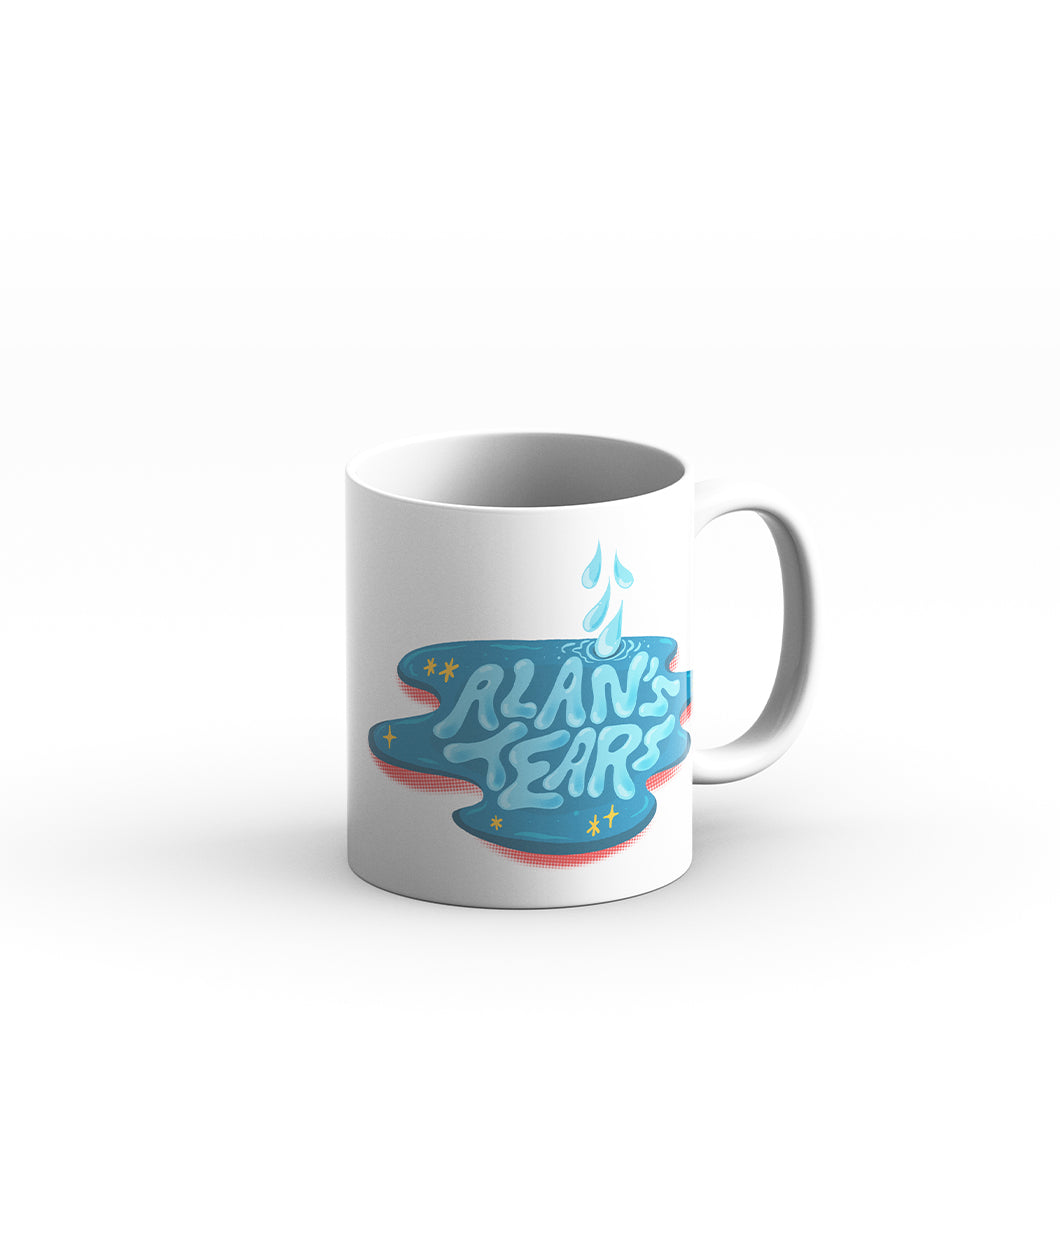 A mug for Alan's tears your beverage of choice. Pairs well with movies or Cinema Therapy episodes!